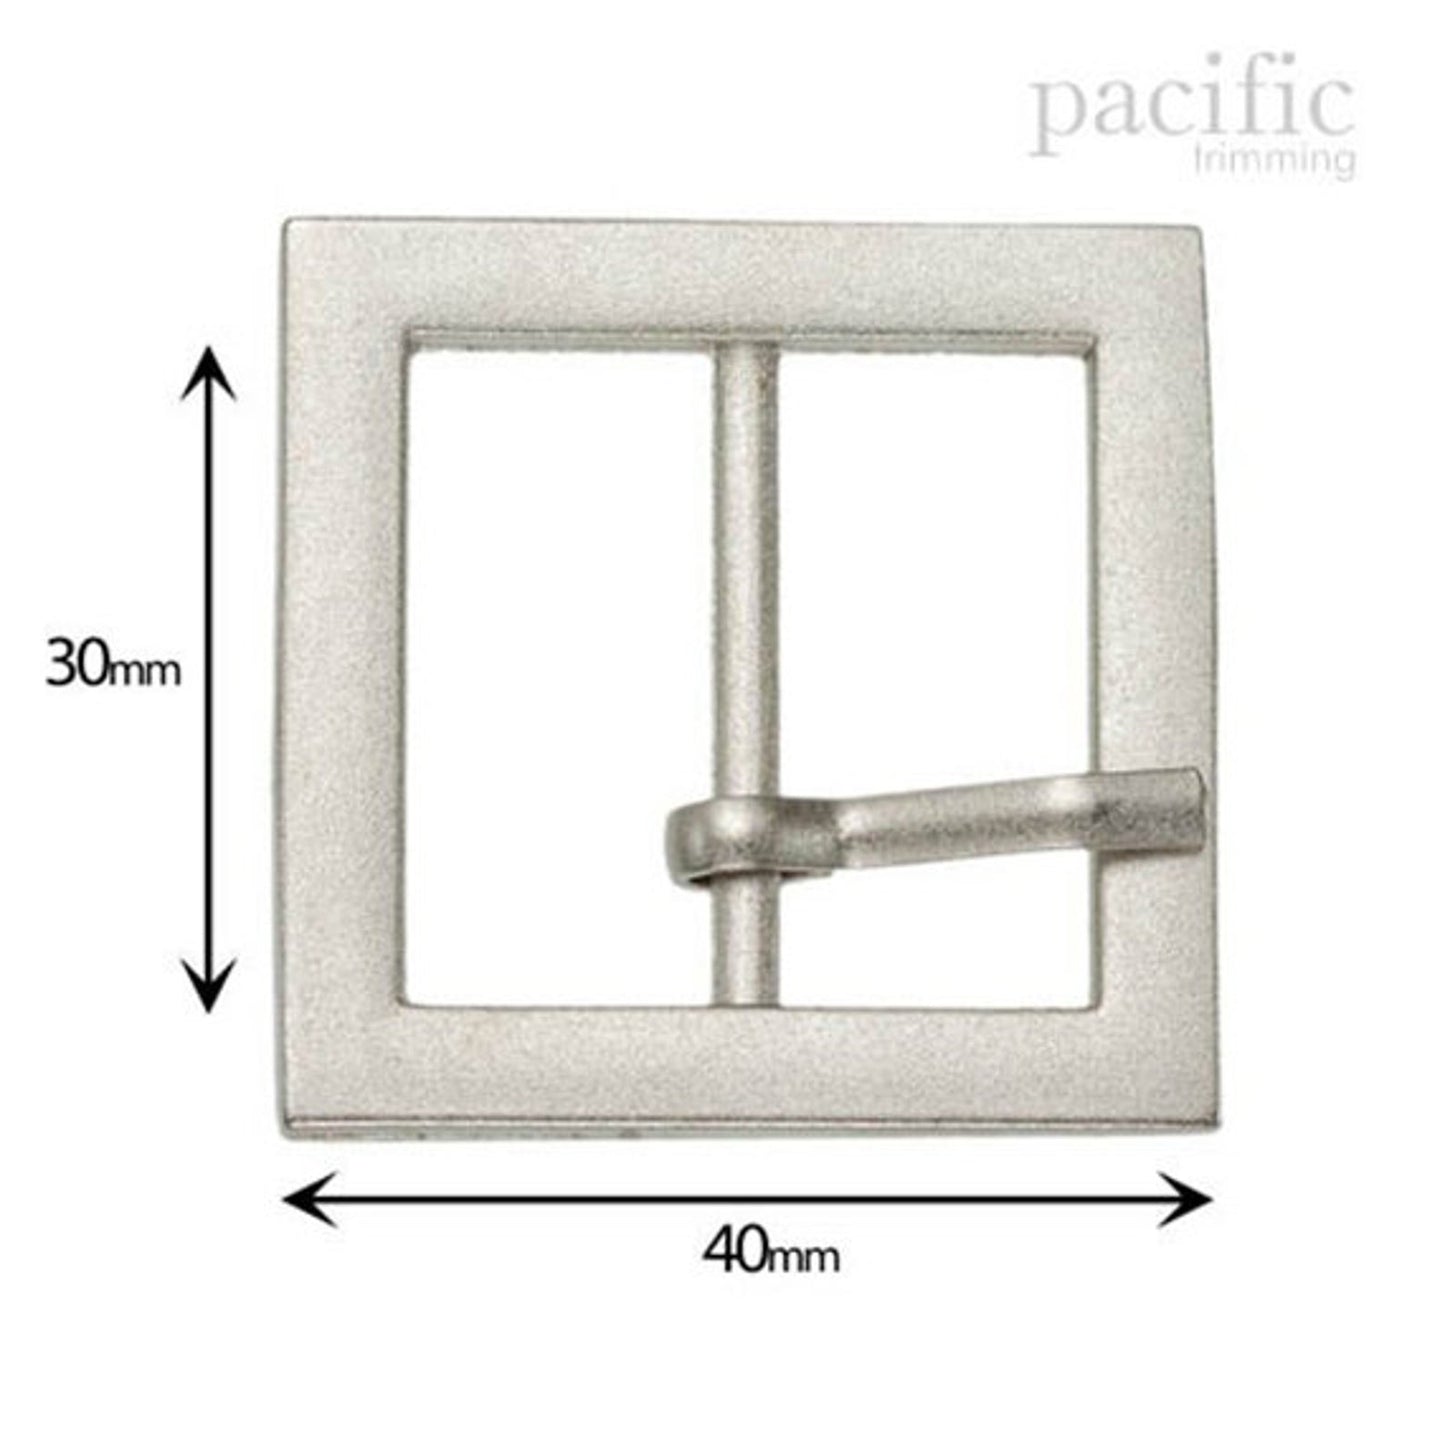 30mm Polished Buckle : 160257 - Pacific Trimming